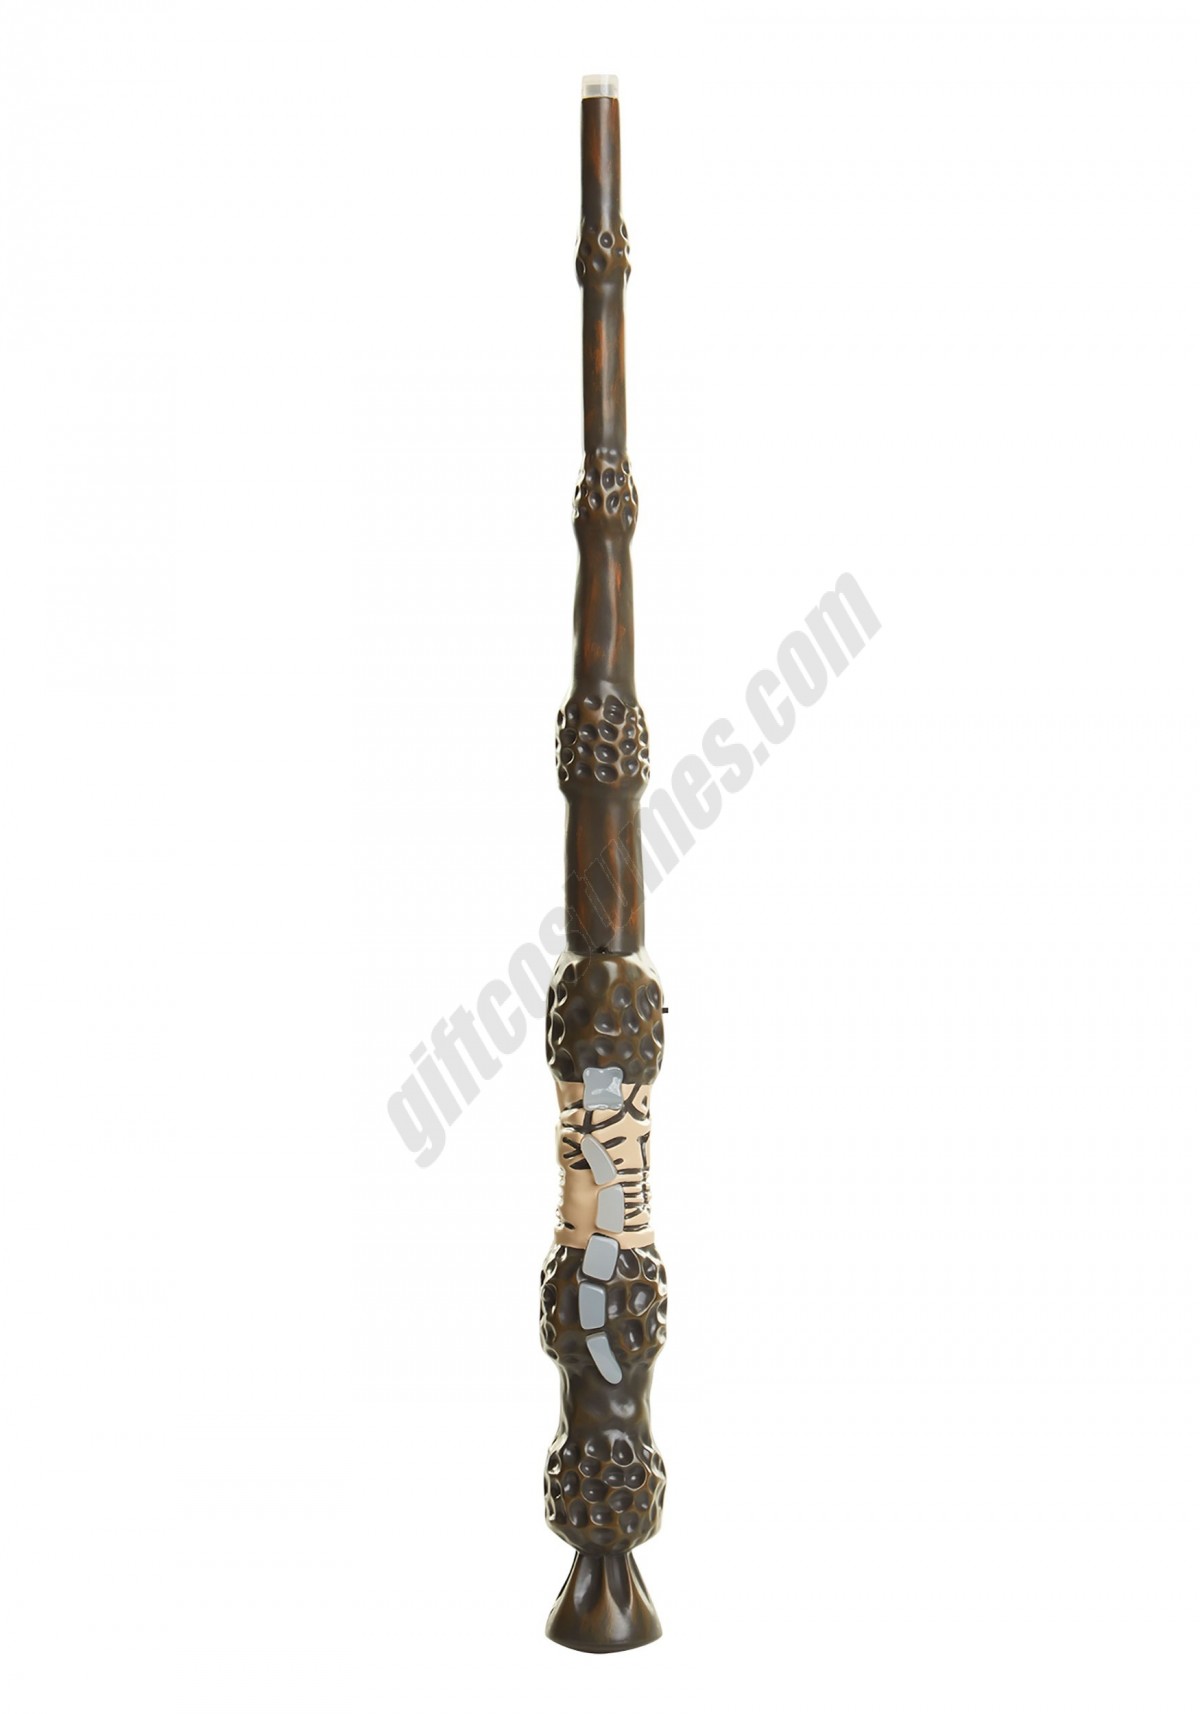 Feature Wizard Wands- Dumbledore Wand  Promotions - -0